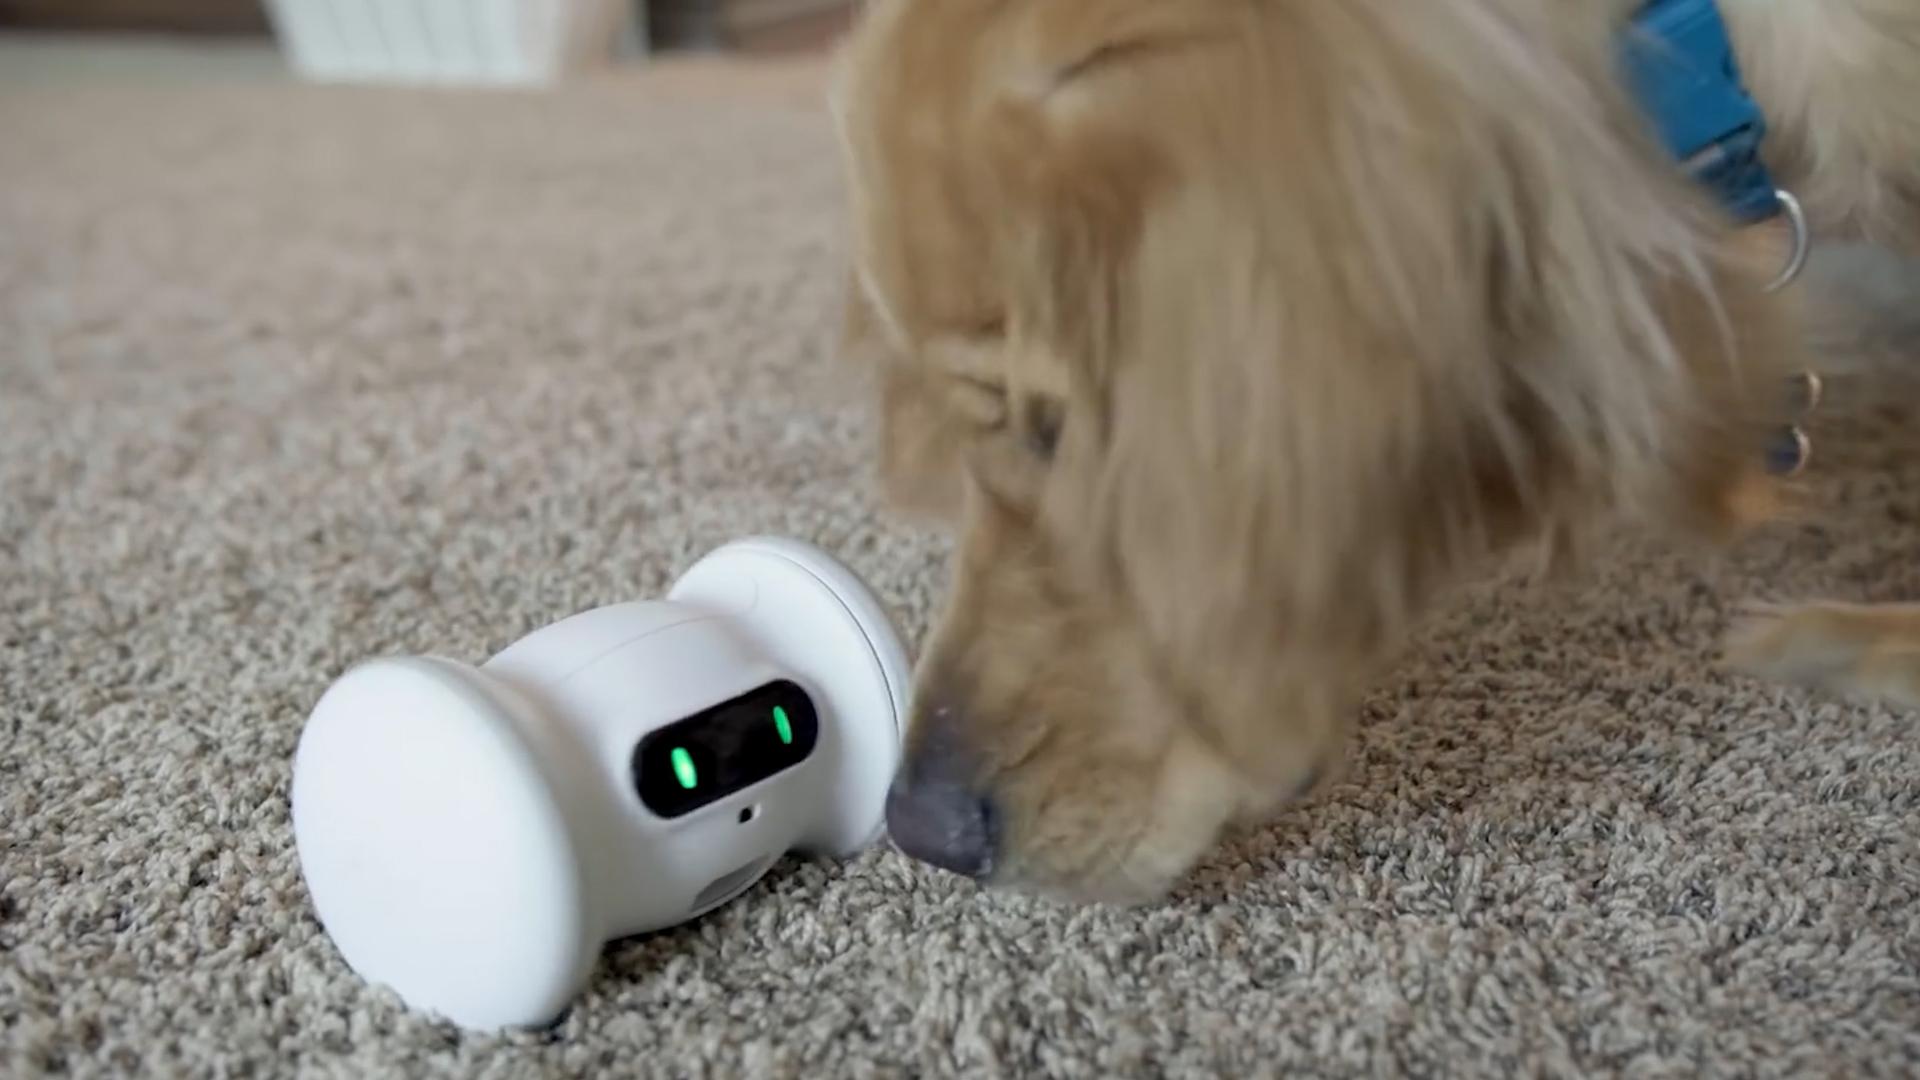 This bot could help your dog stay in shape